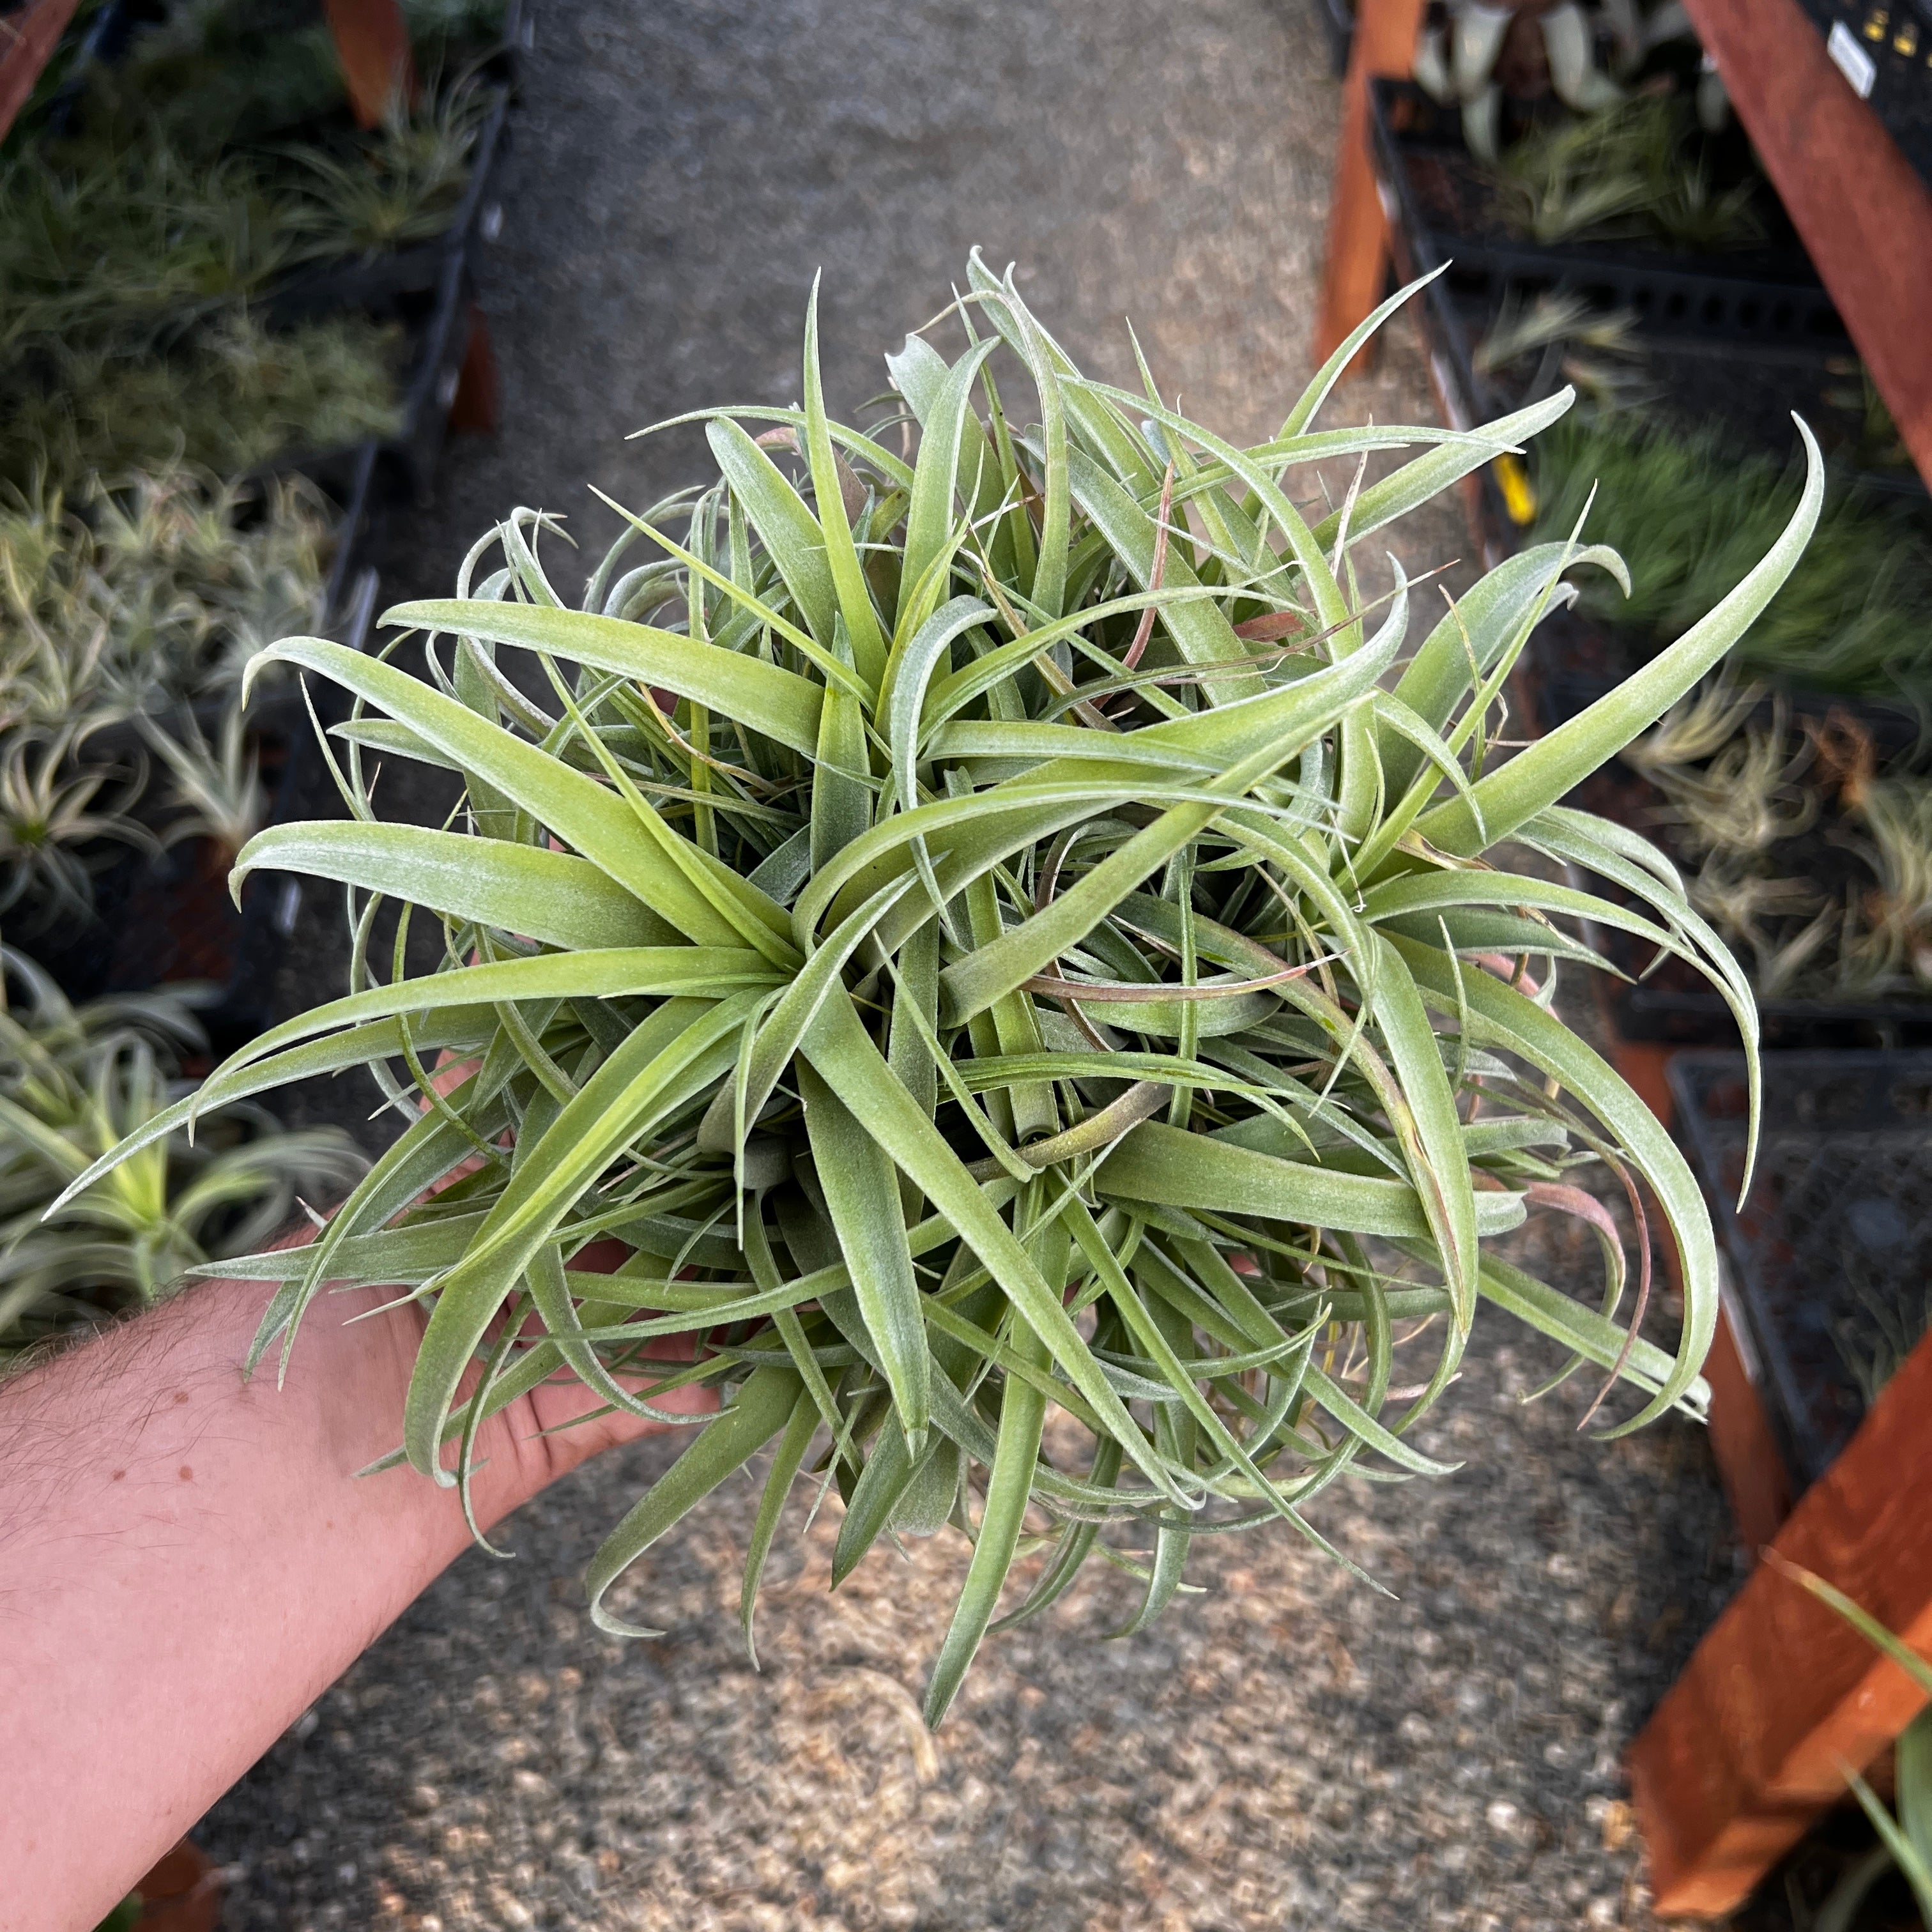 Tillandsia betty (Brachycaulos x xerographica) clump air plant with pups in hand